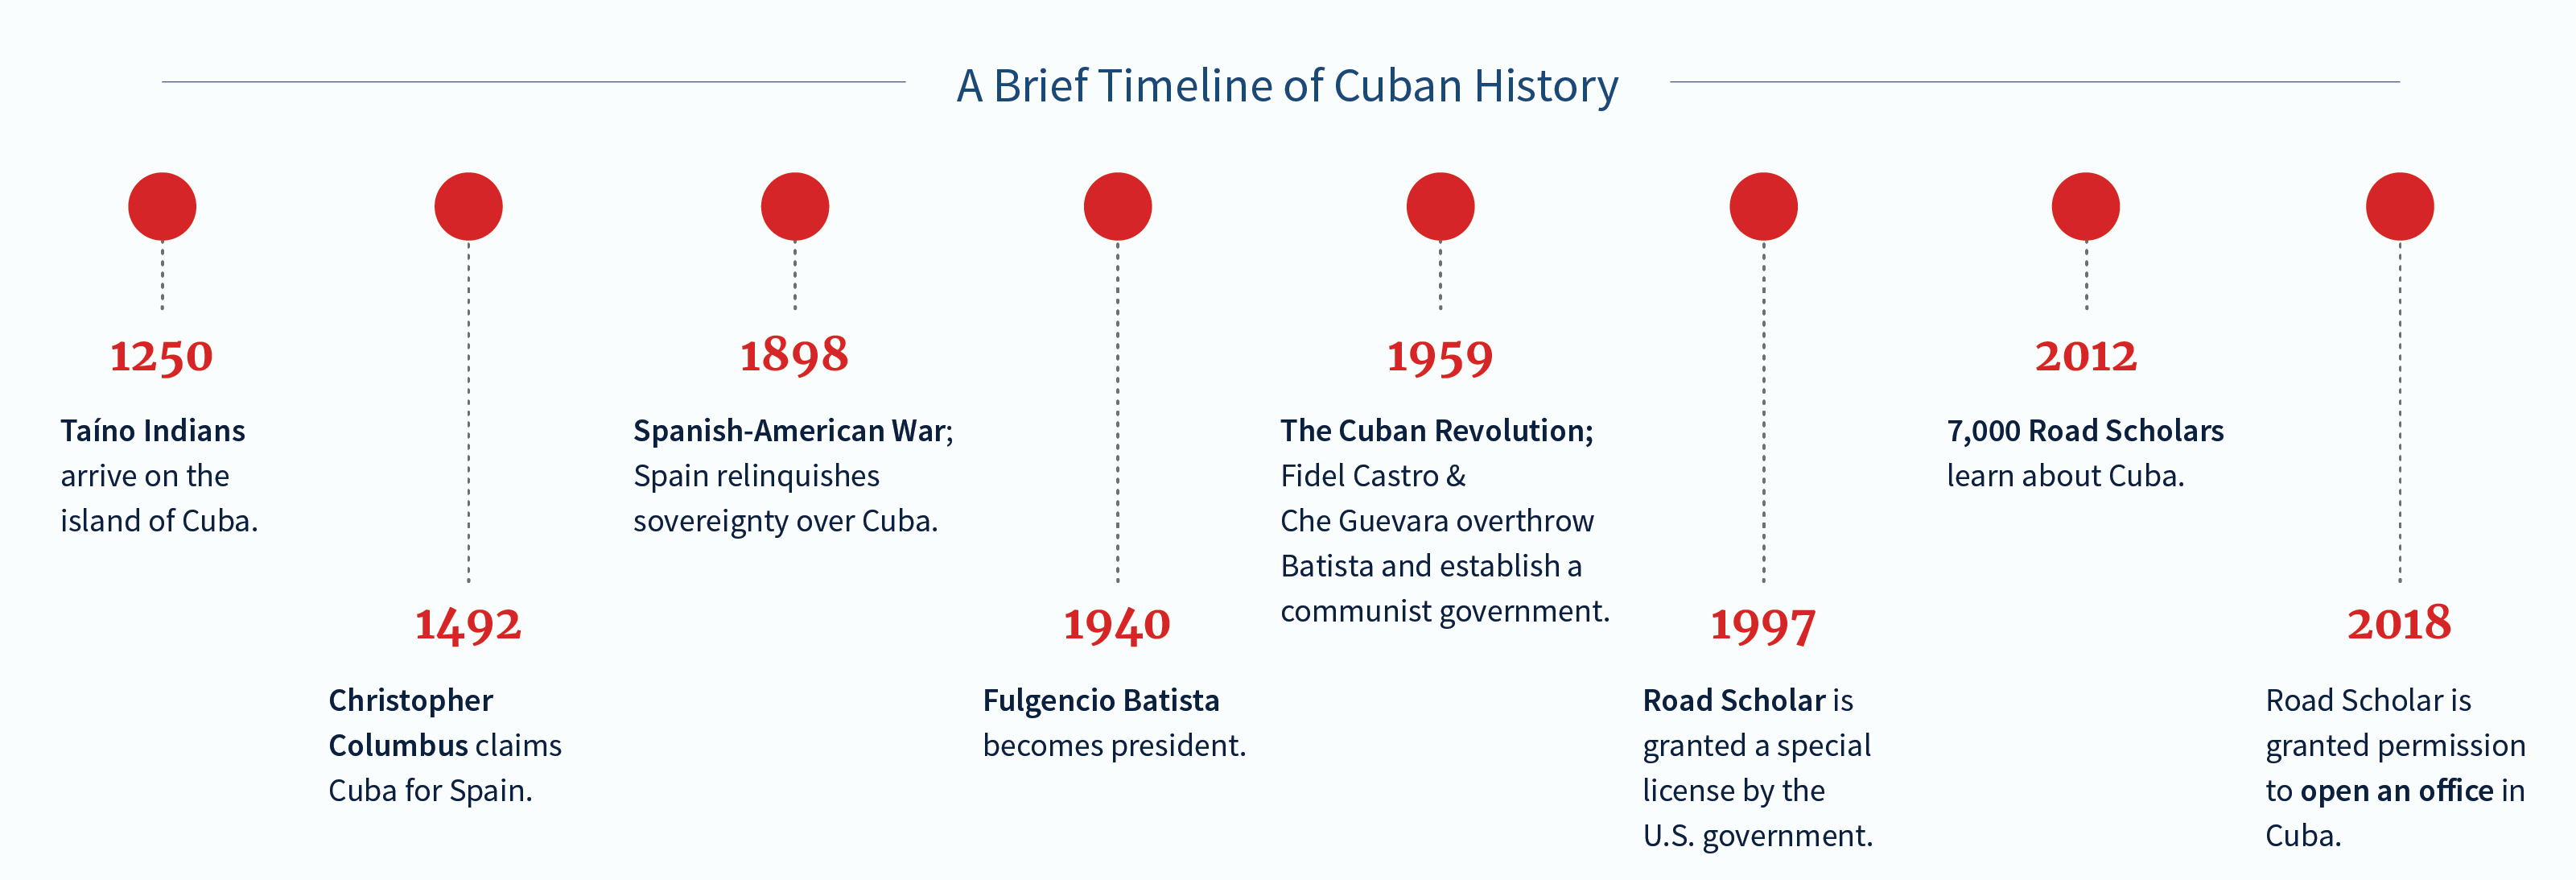 Timeline of Road Scholar's history with Cuba